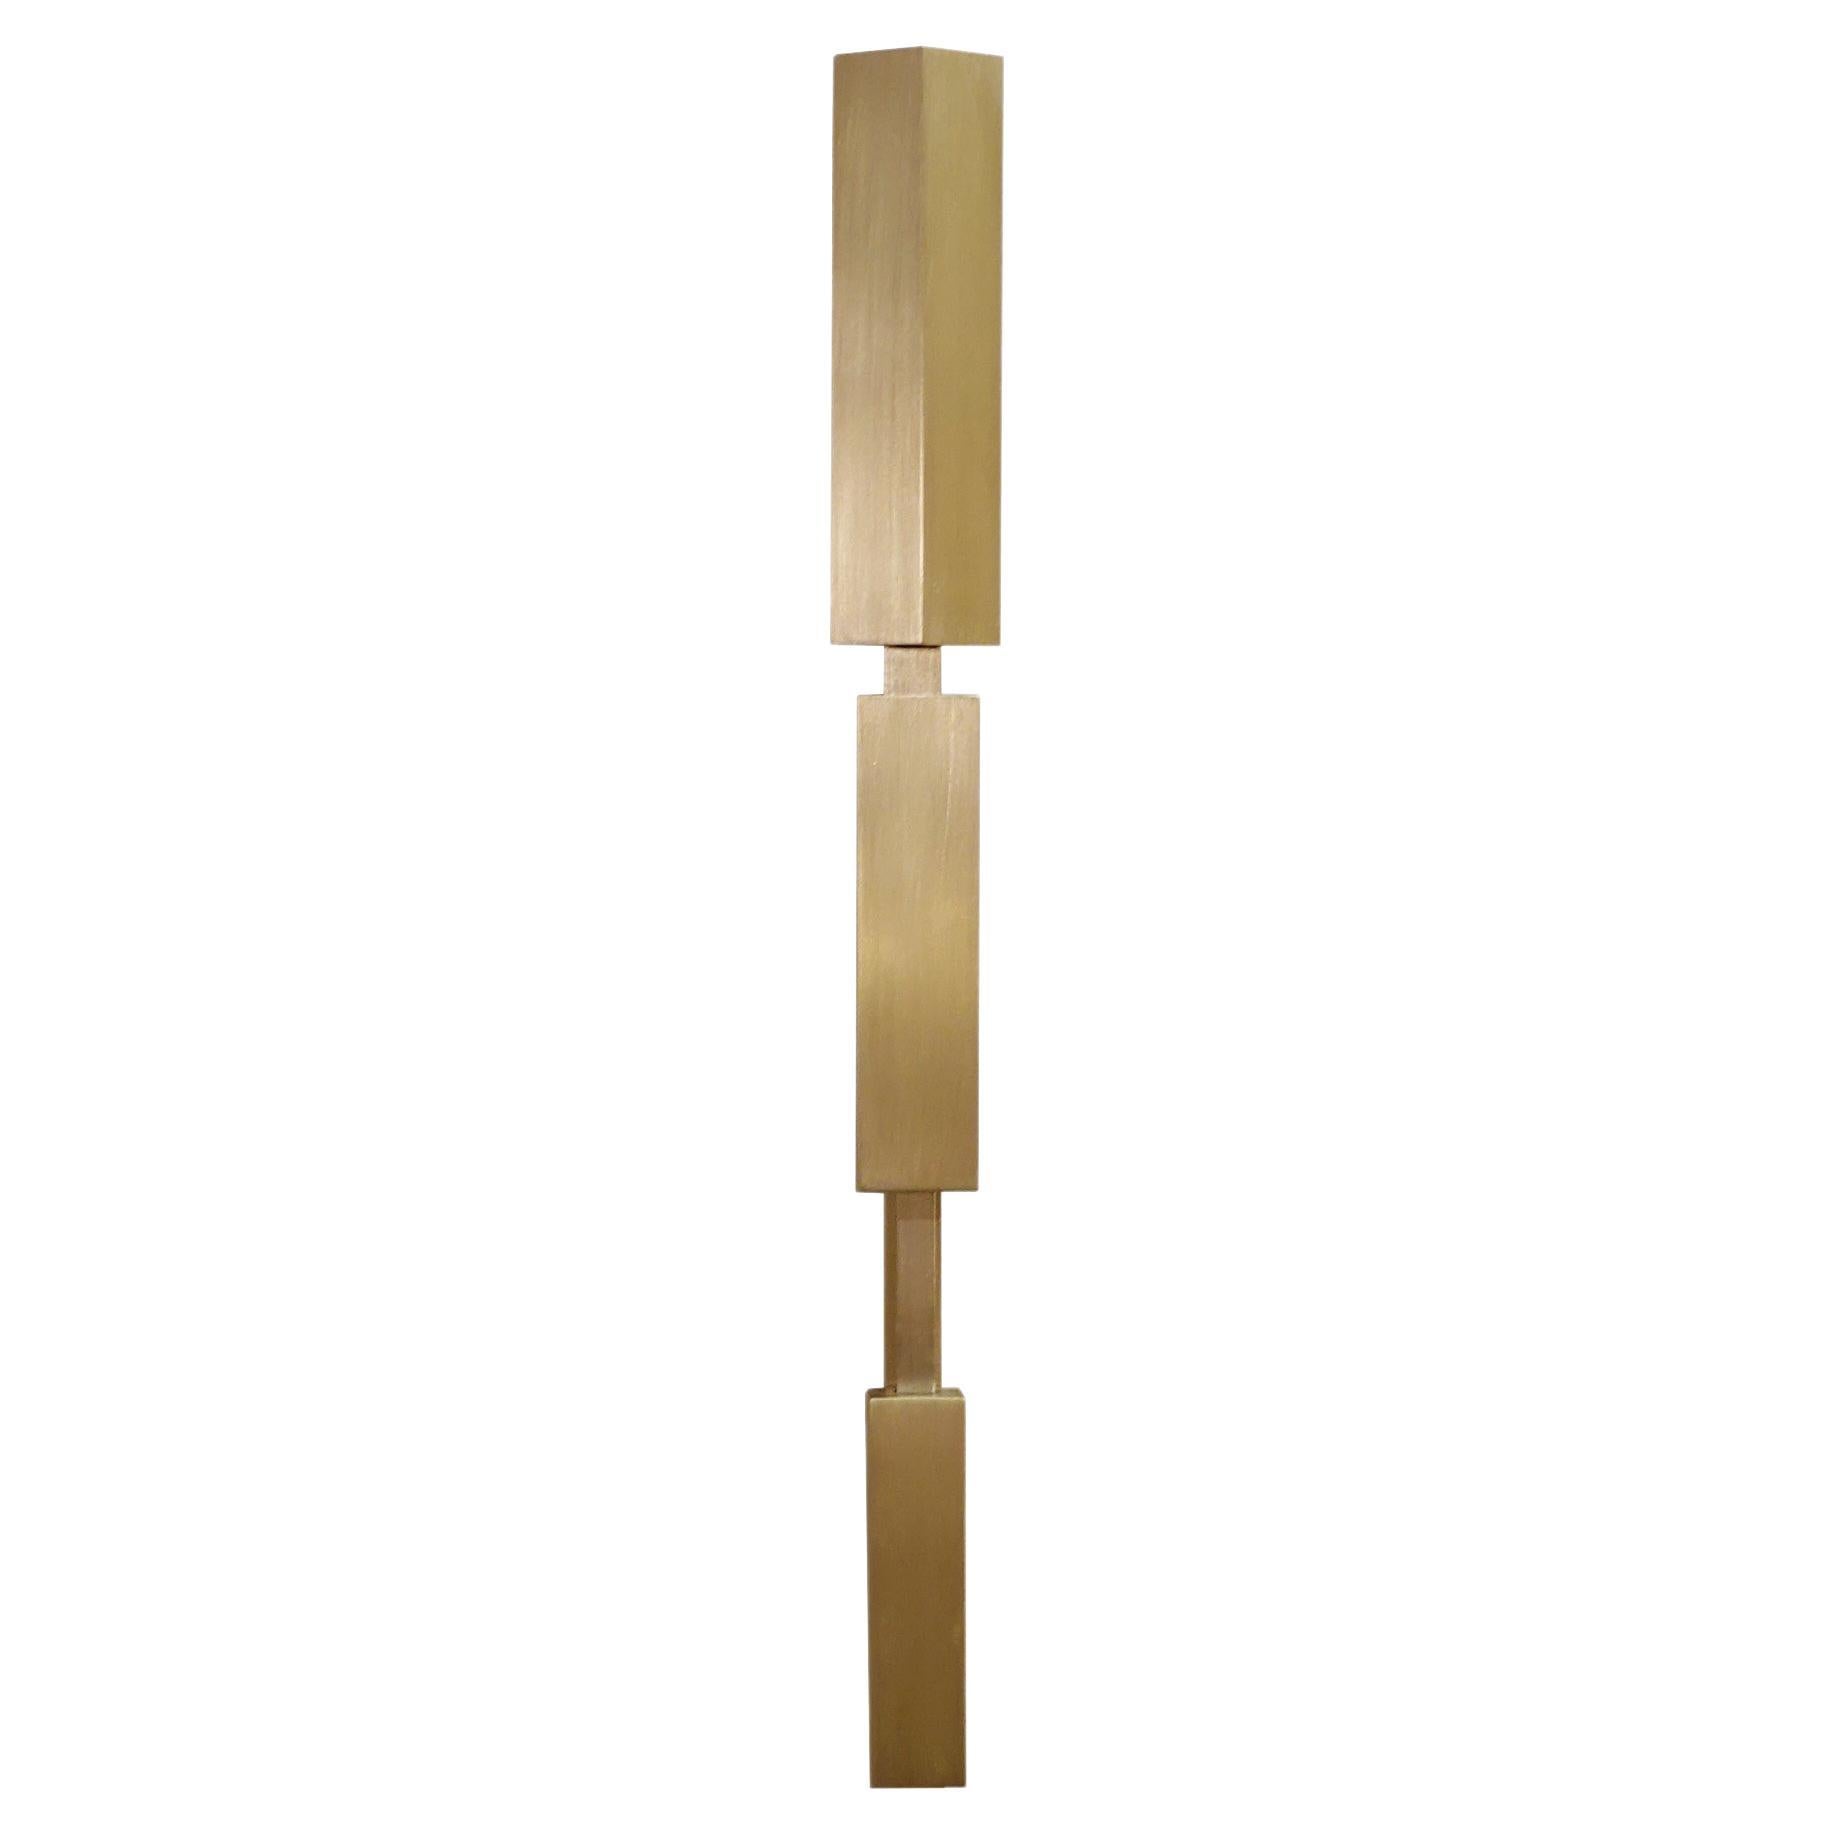 Tetra Ray - Solid Brass Wall Light Handmade by Diaphan Studio For Sale